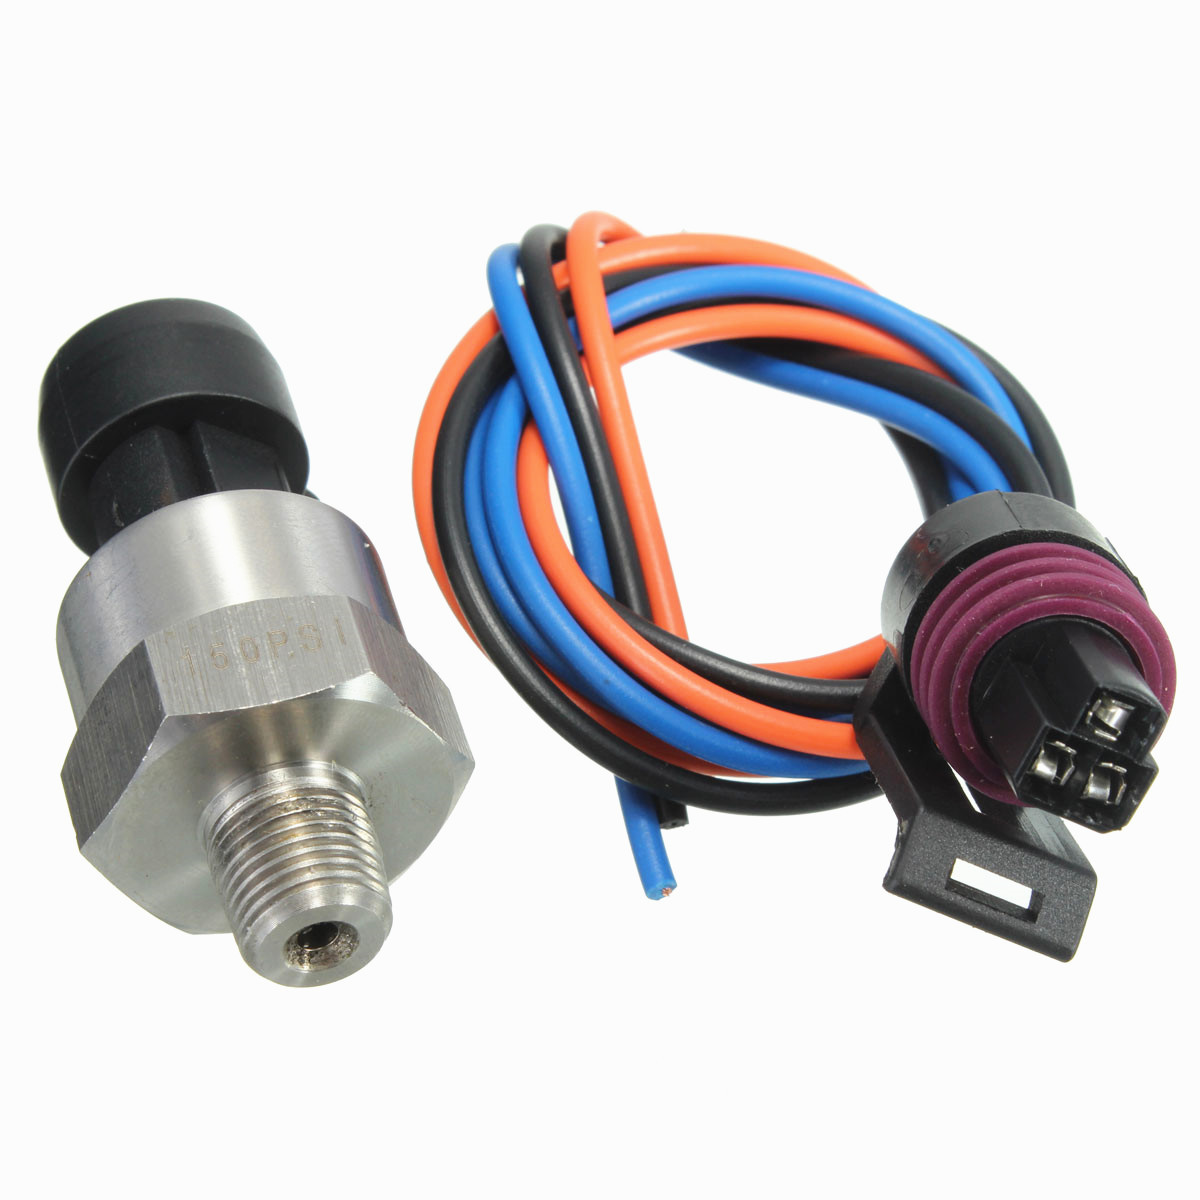 

150Psi Pressure Transducer Sensor for Oil Fuel Diesel Gas Air Water